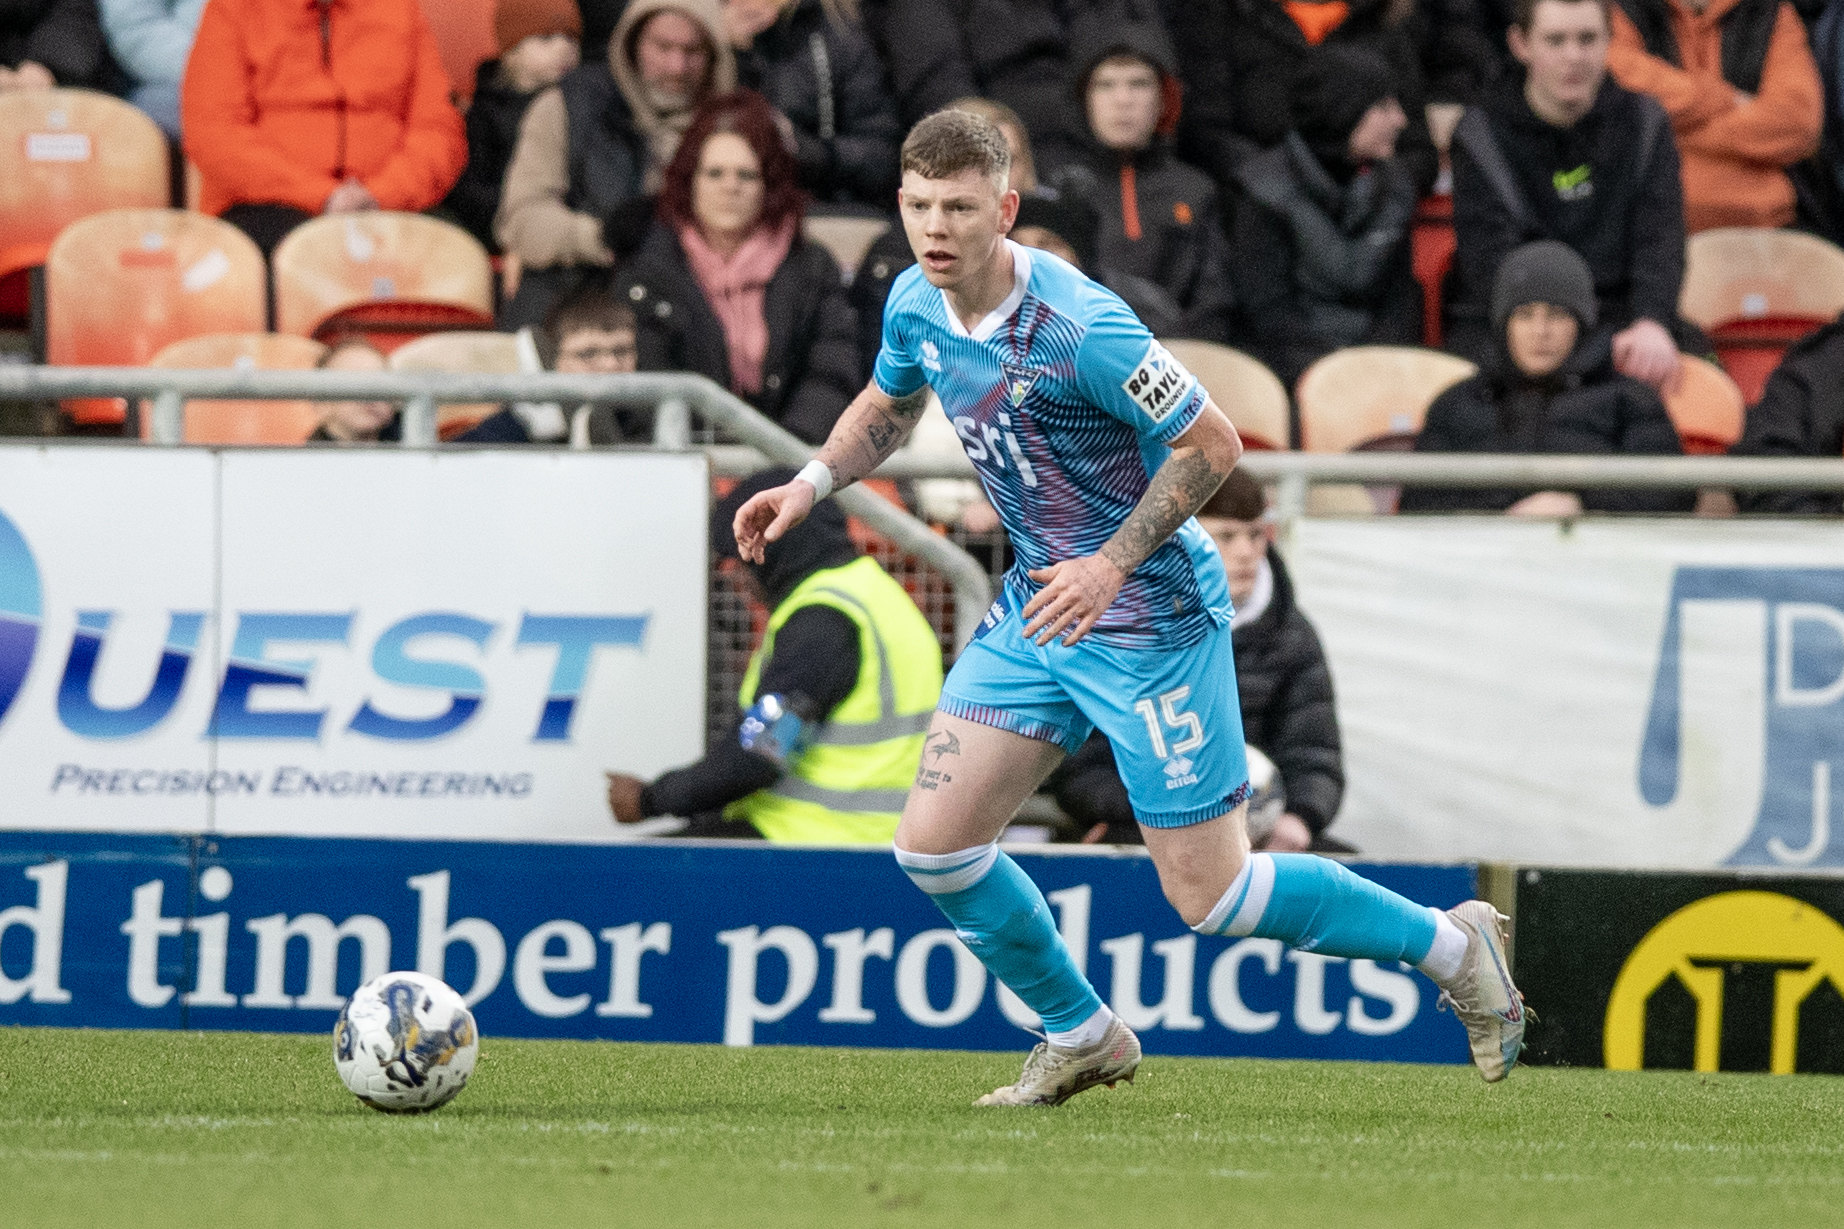 Dunfermline boss makes case for the defence at Dundee United